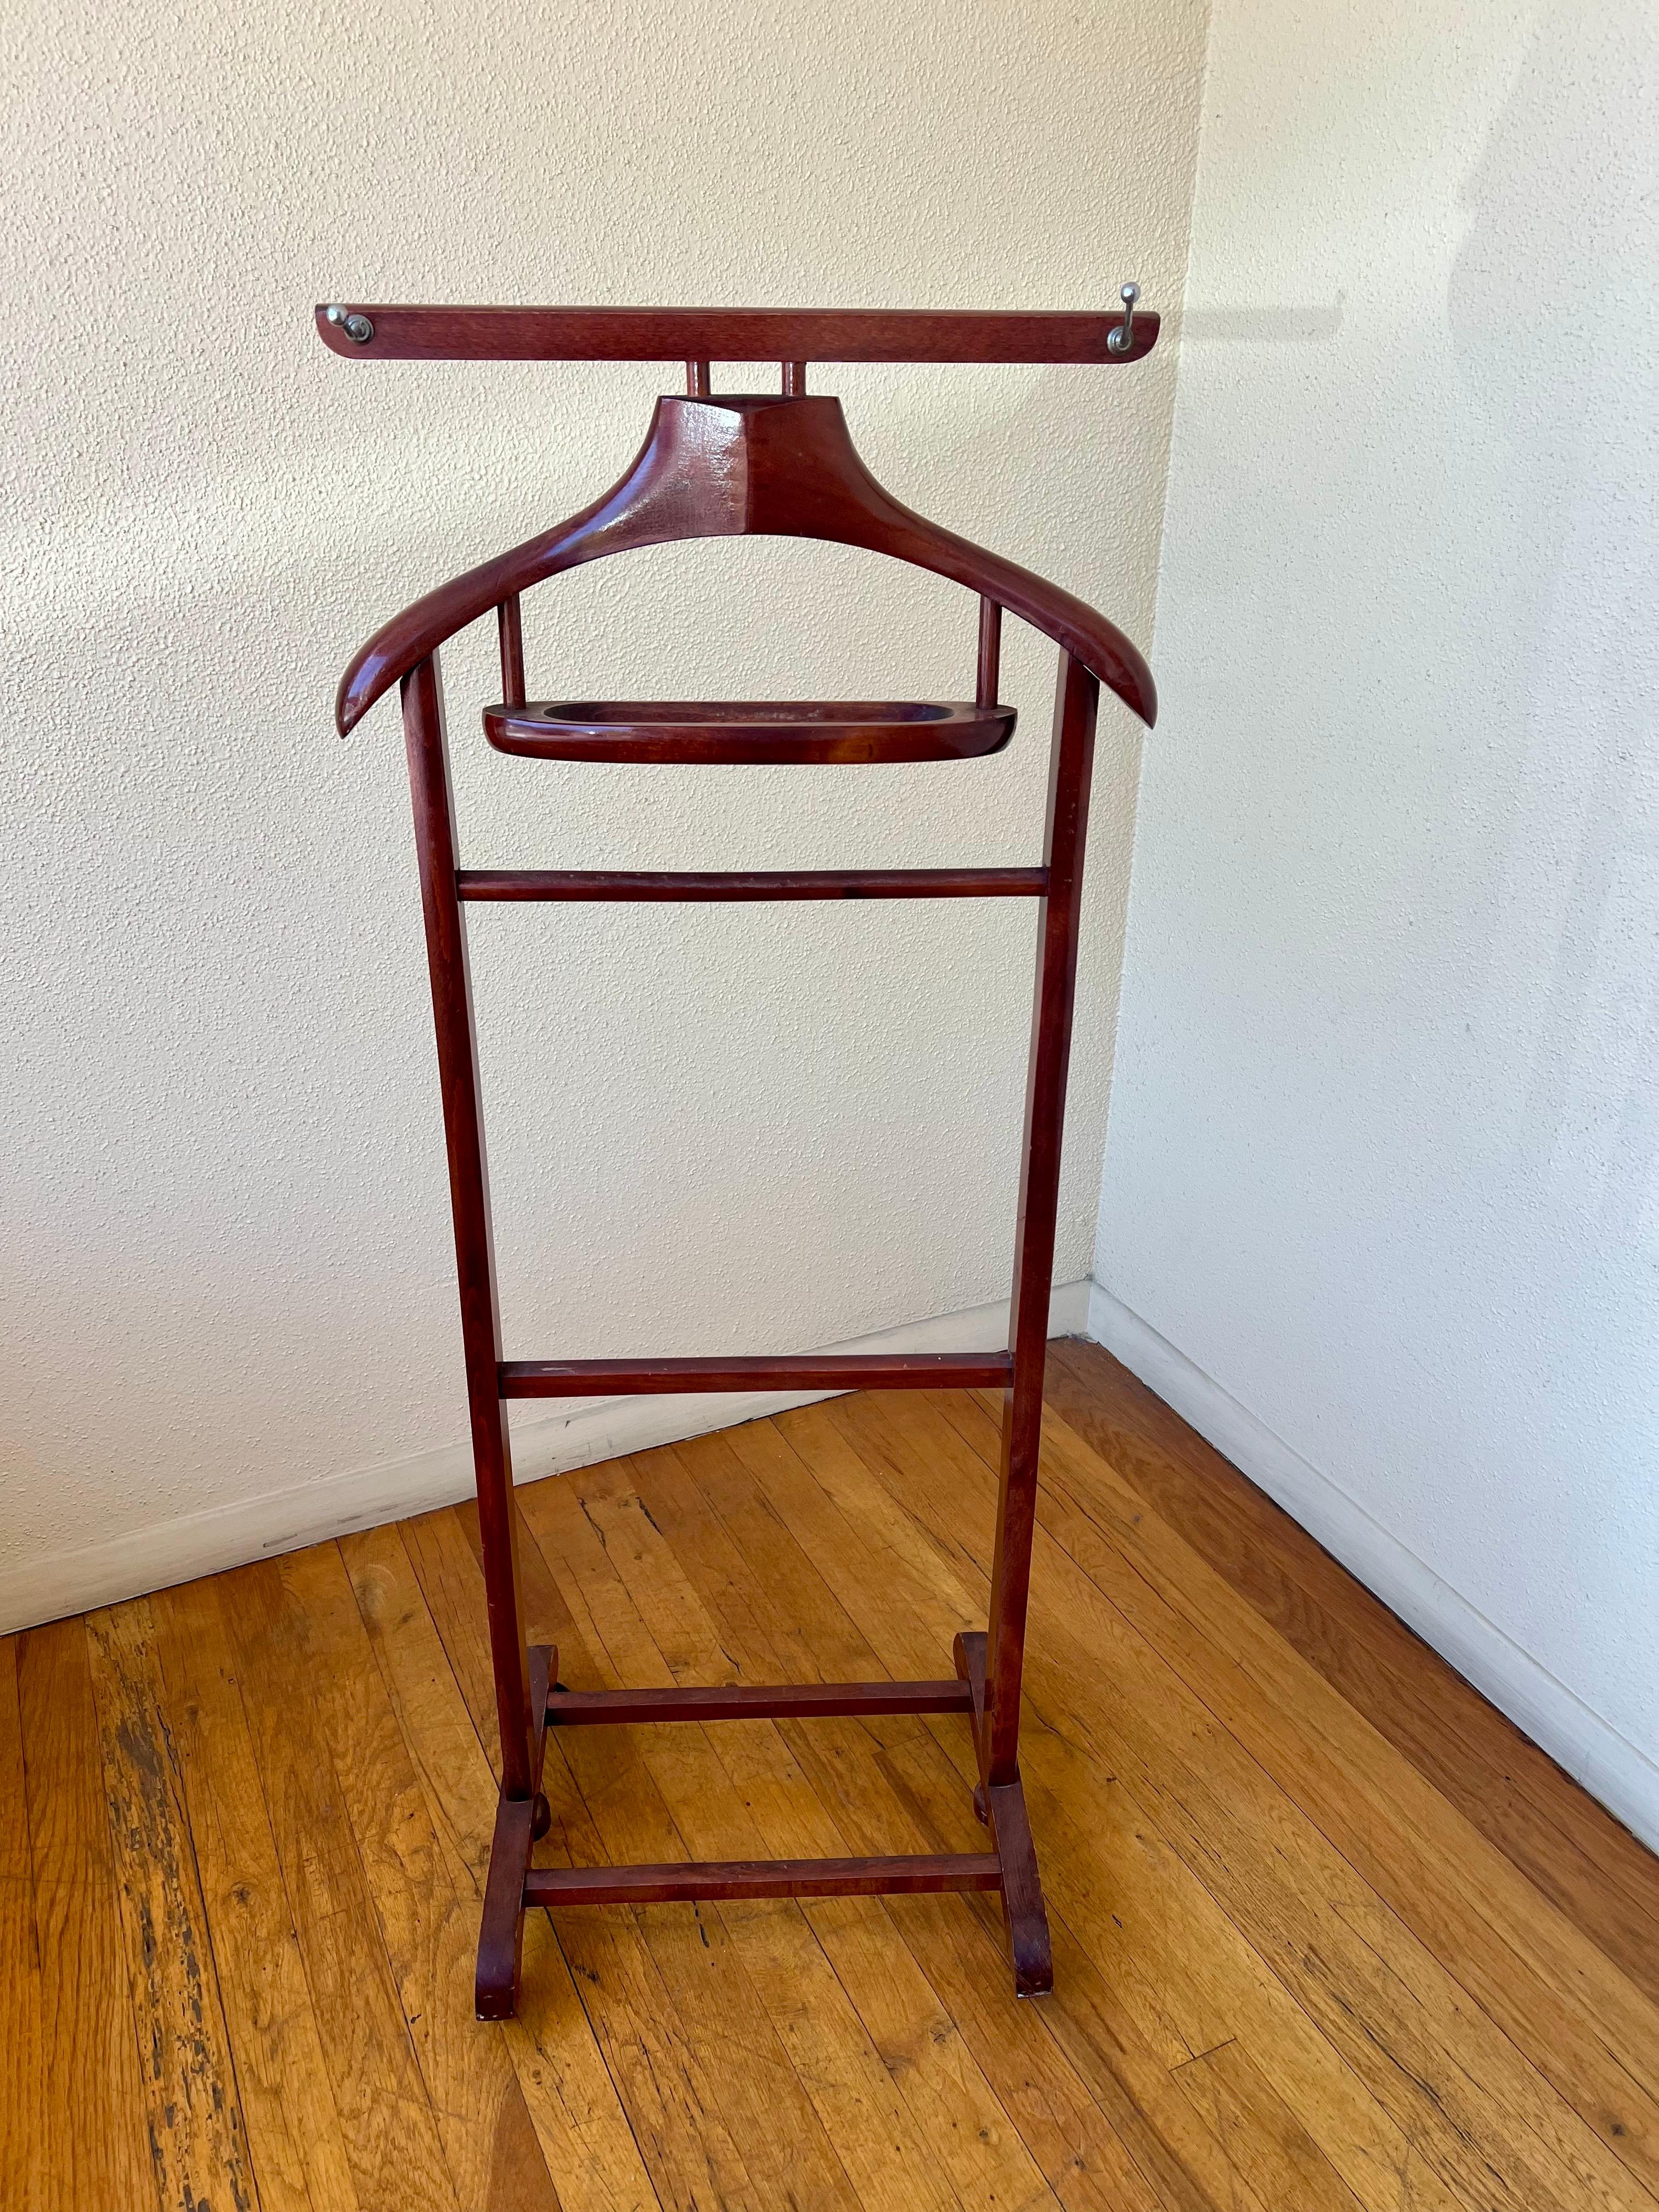 Elegant solid light cherry Mid-Century Modern gentlemens valet by Ico & Luisa Parisi for Fratelli Reguitti was made of solid cherry with brass details for shoe rest
The valet is stamped. Made in Italy. great condition beautiful craftmanship.